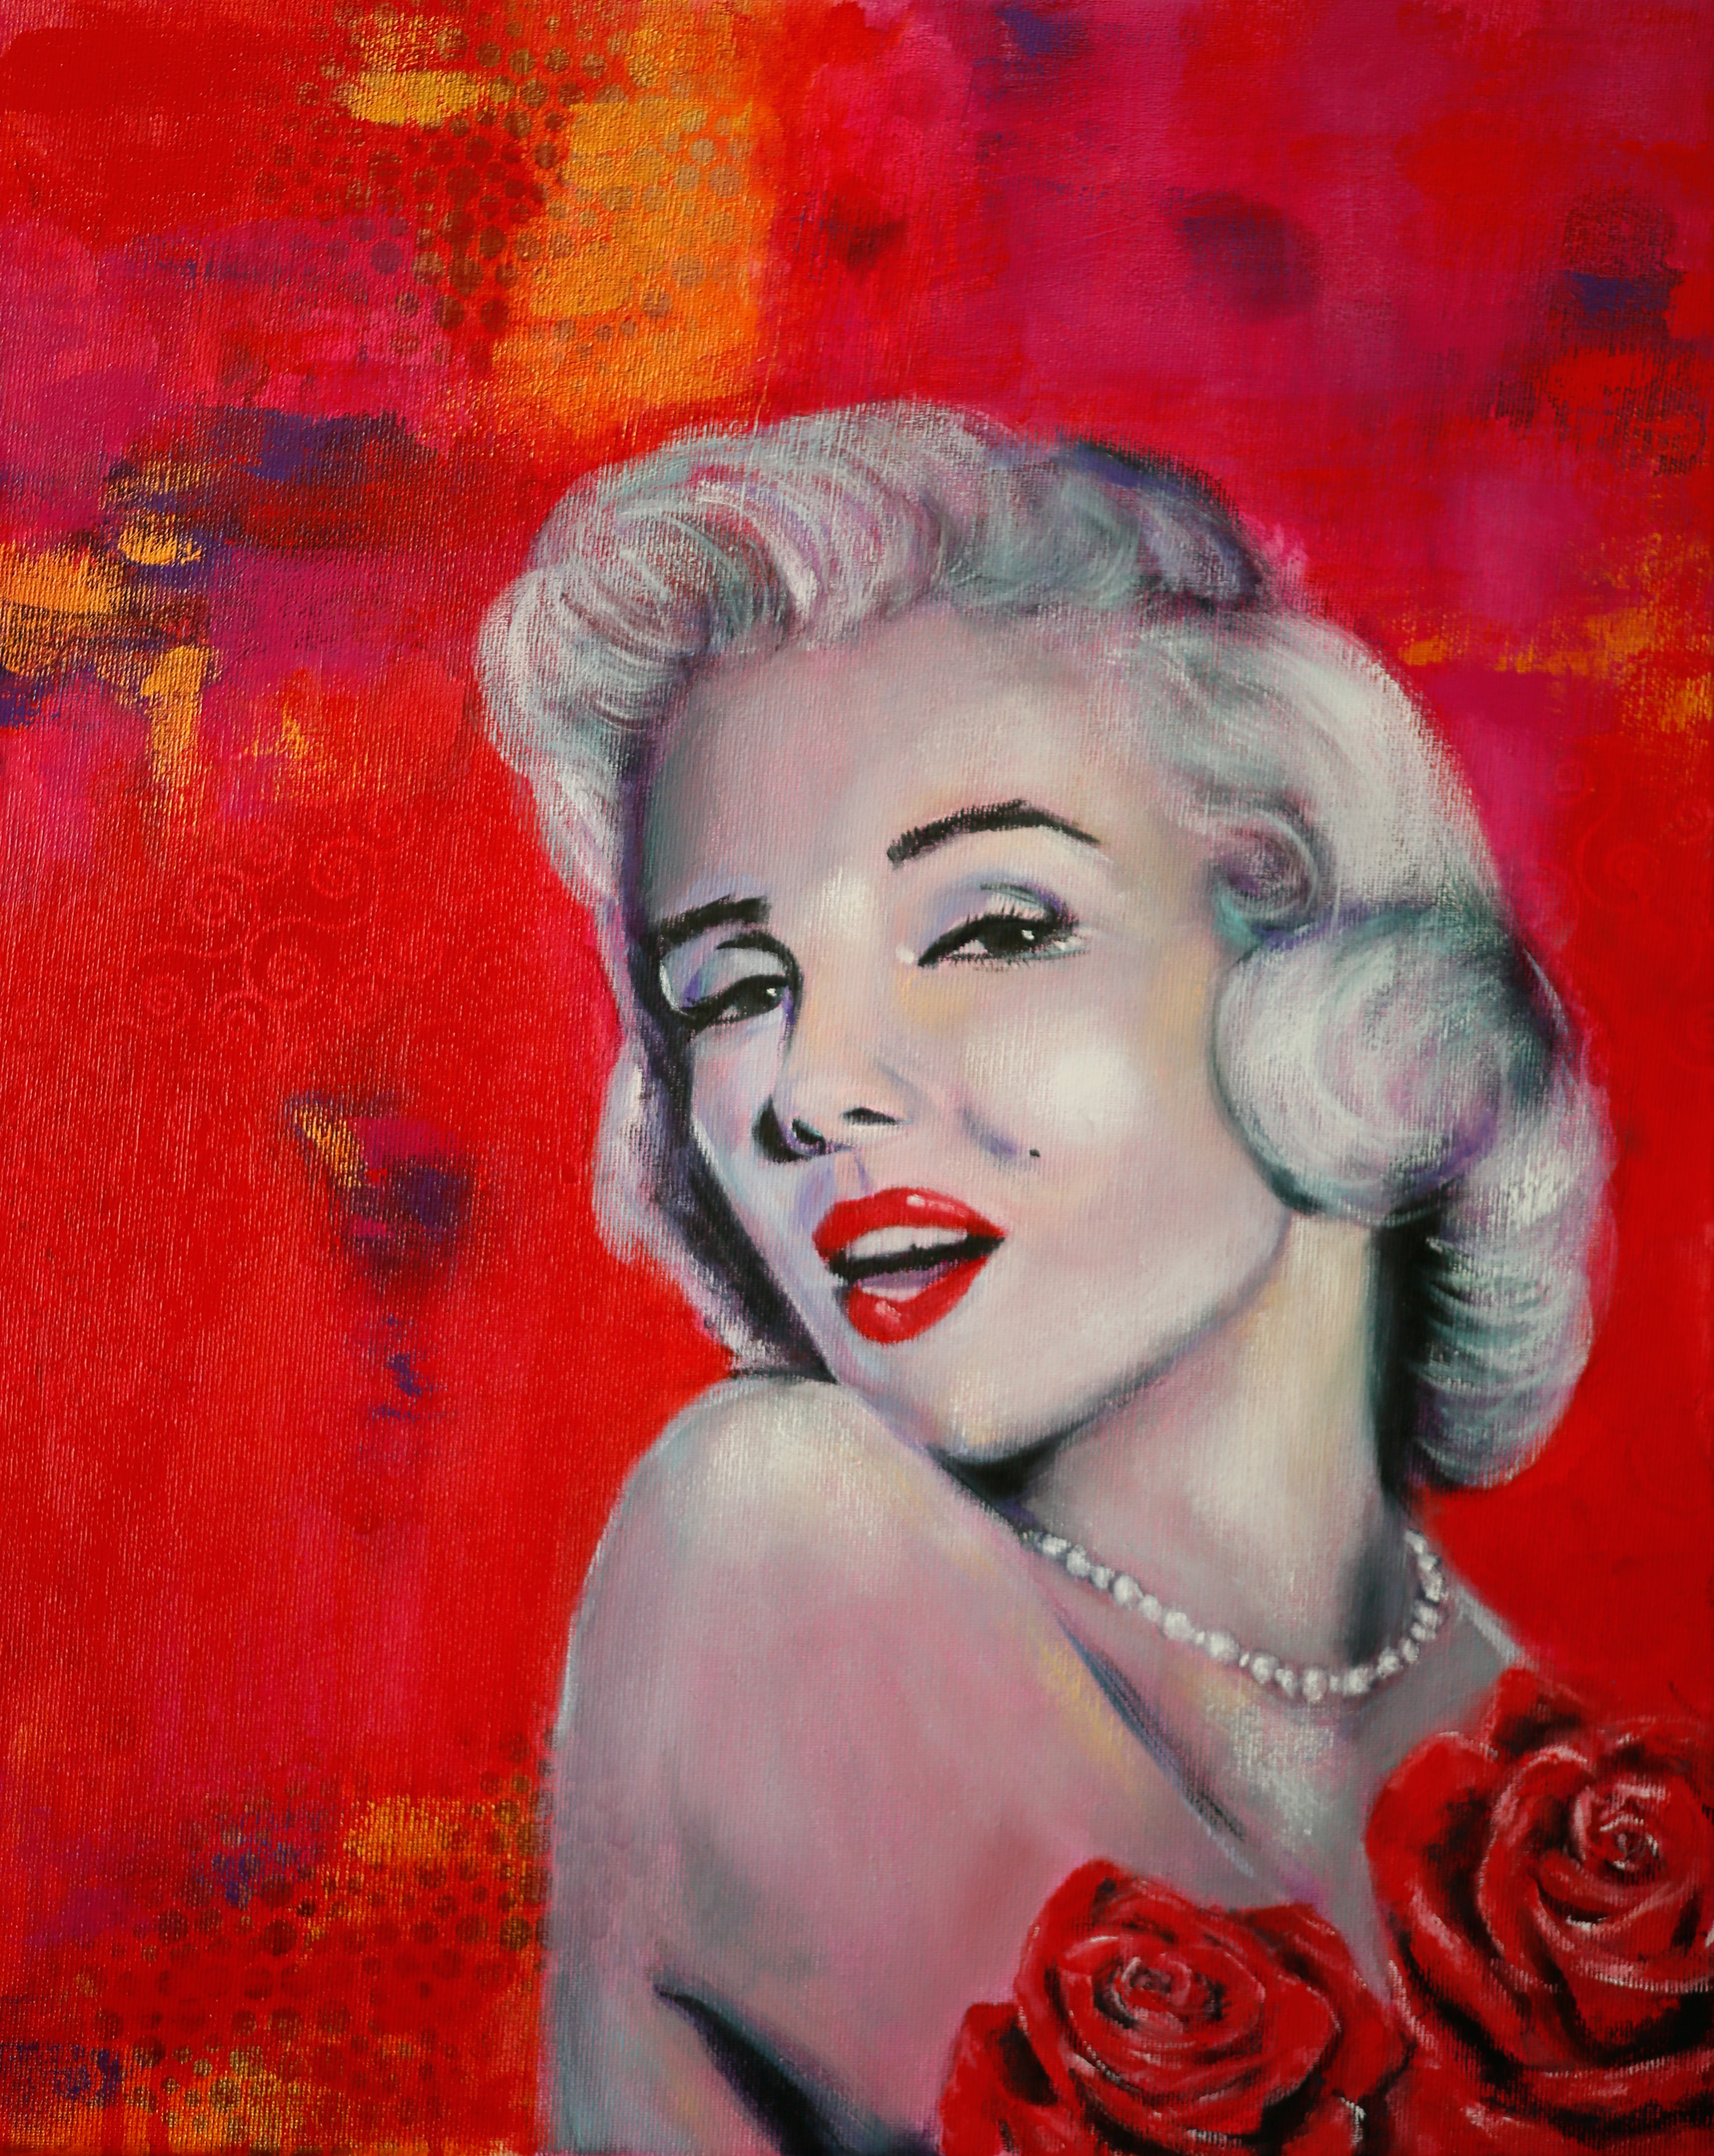 Mixed Media Painting of Marilyn Monroe on abstract predominantly red background